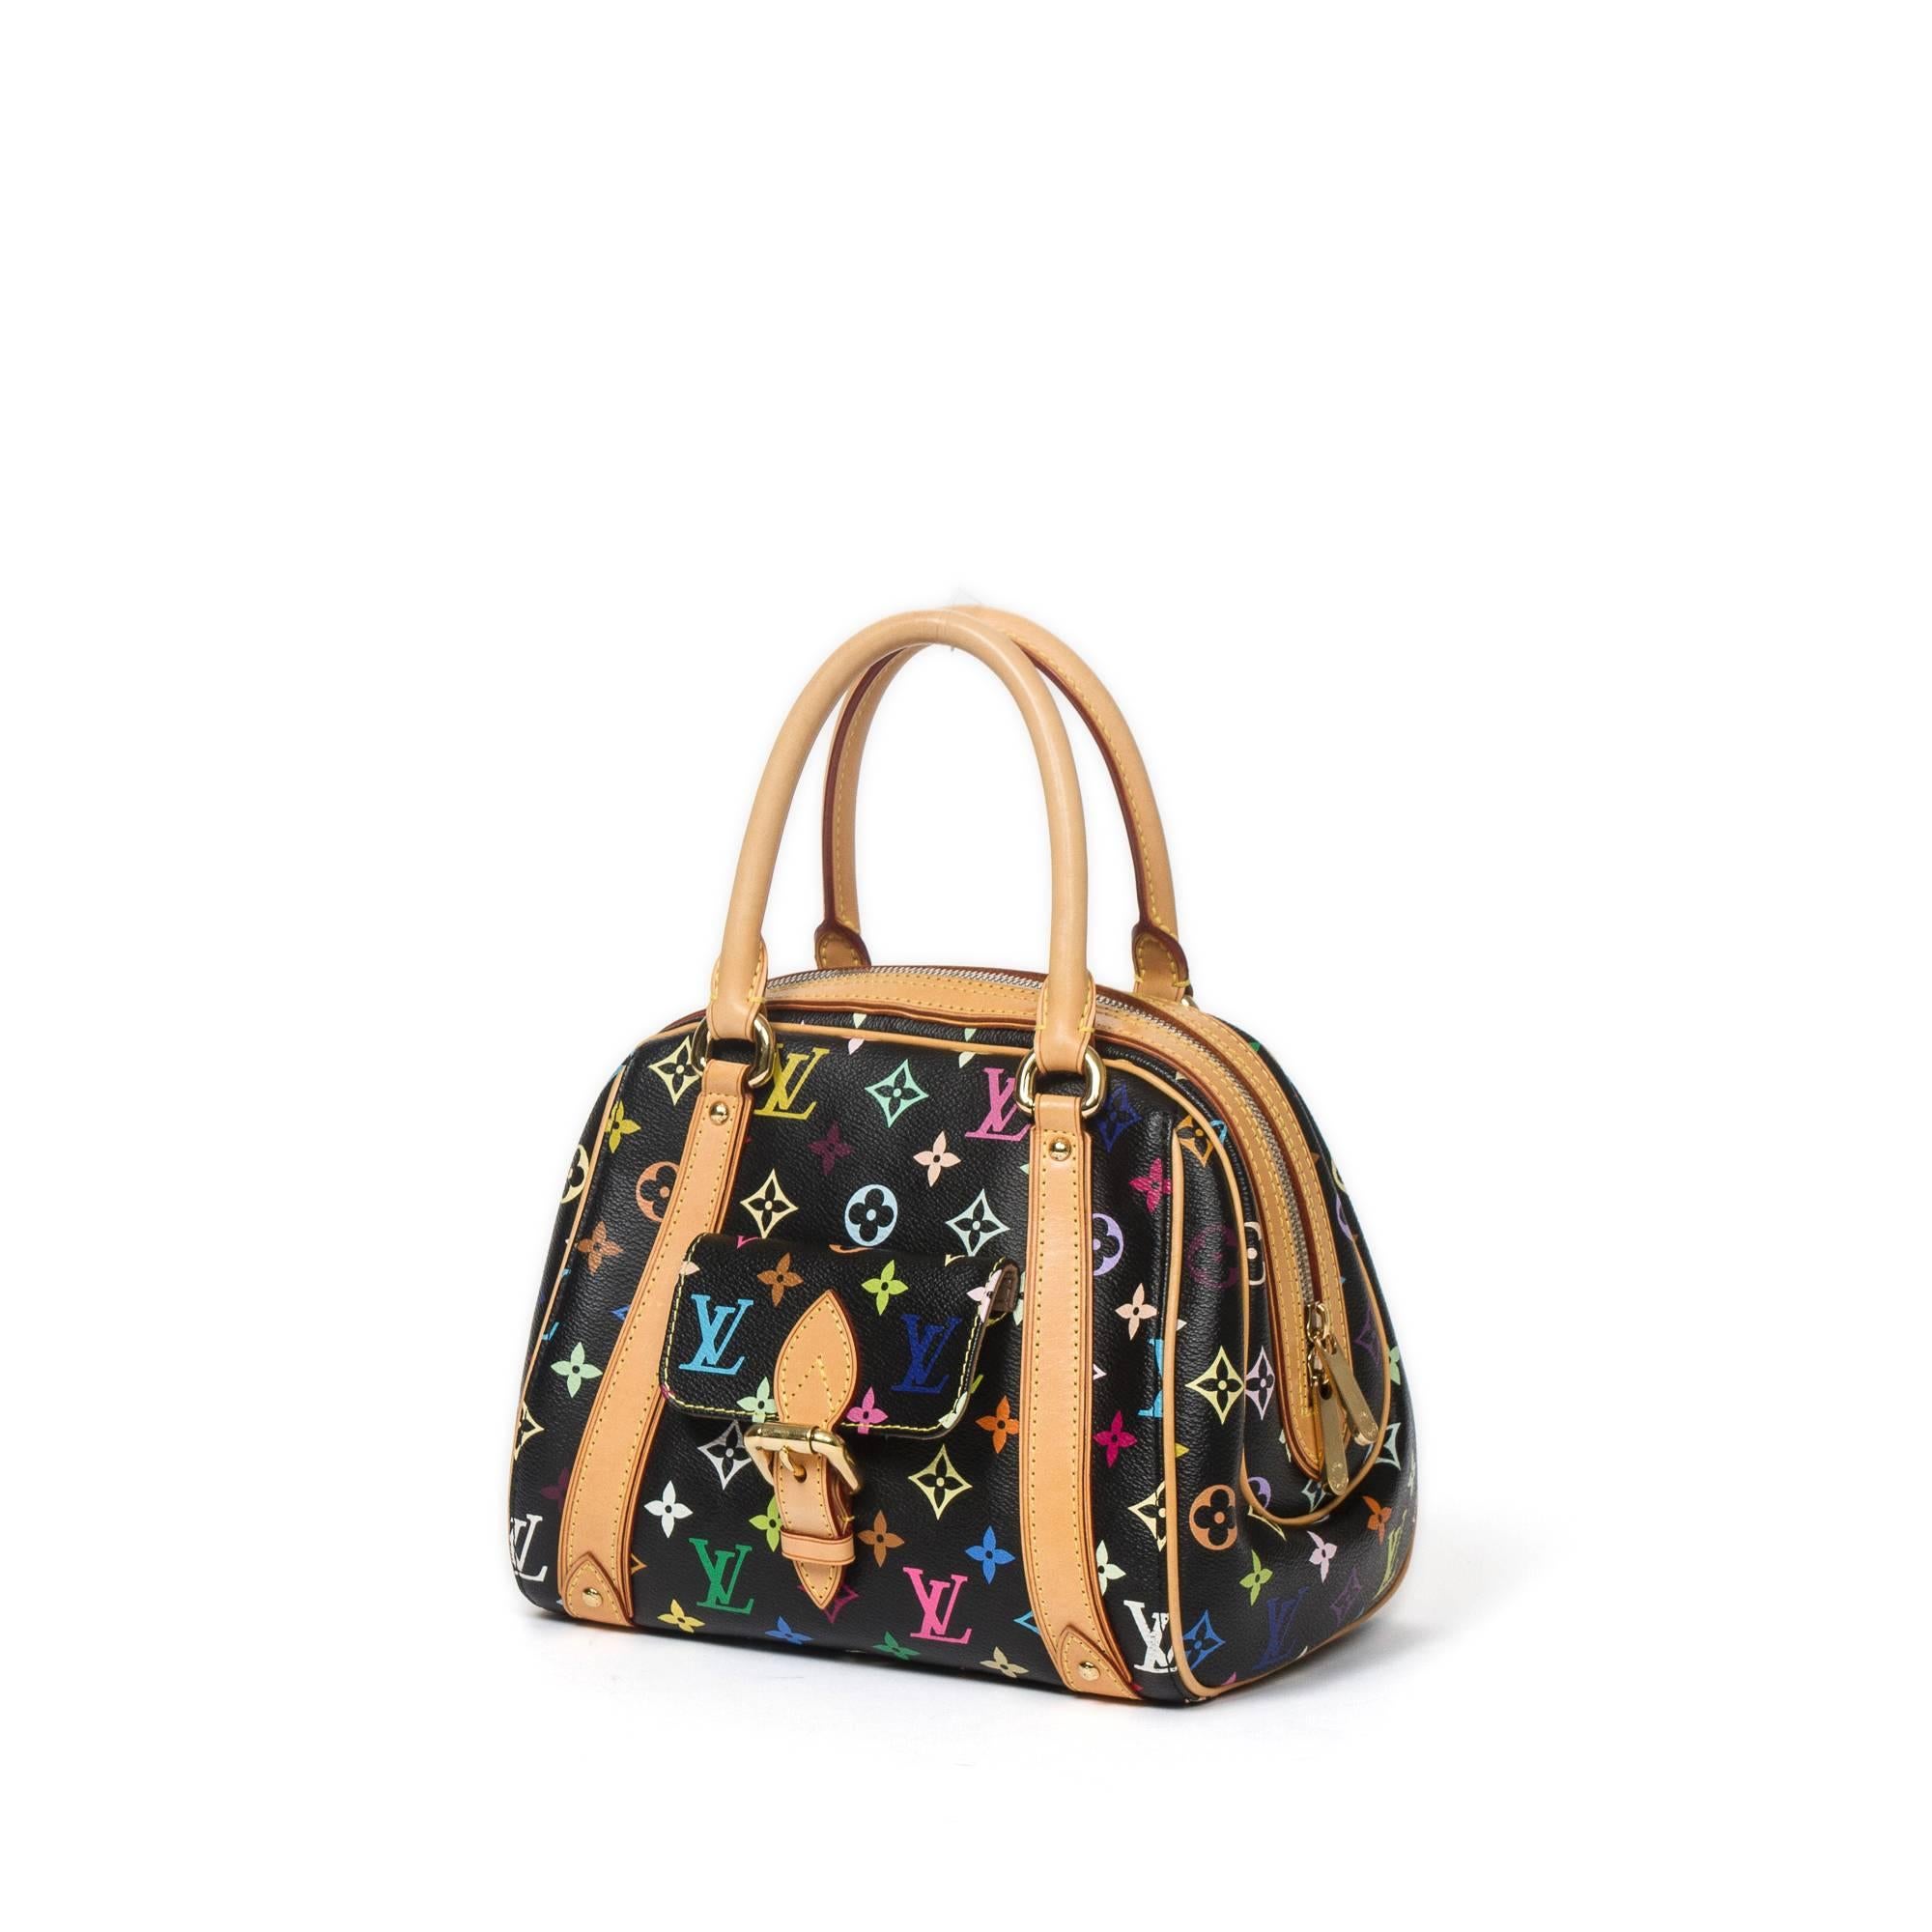 Louis Vuitton Priscilla in black multicolor monogram canvas with vachetta leather handles and golden brass hardware. Dustbag included.
Production code: SP0098. Model from 2008, Slight wear on canvas - nearly invisible. 
Close to mint condition.